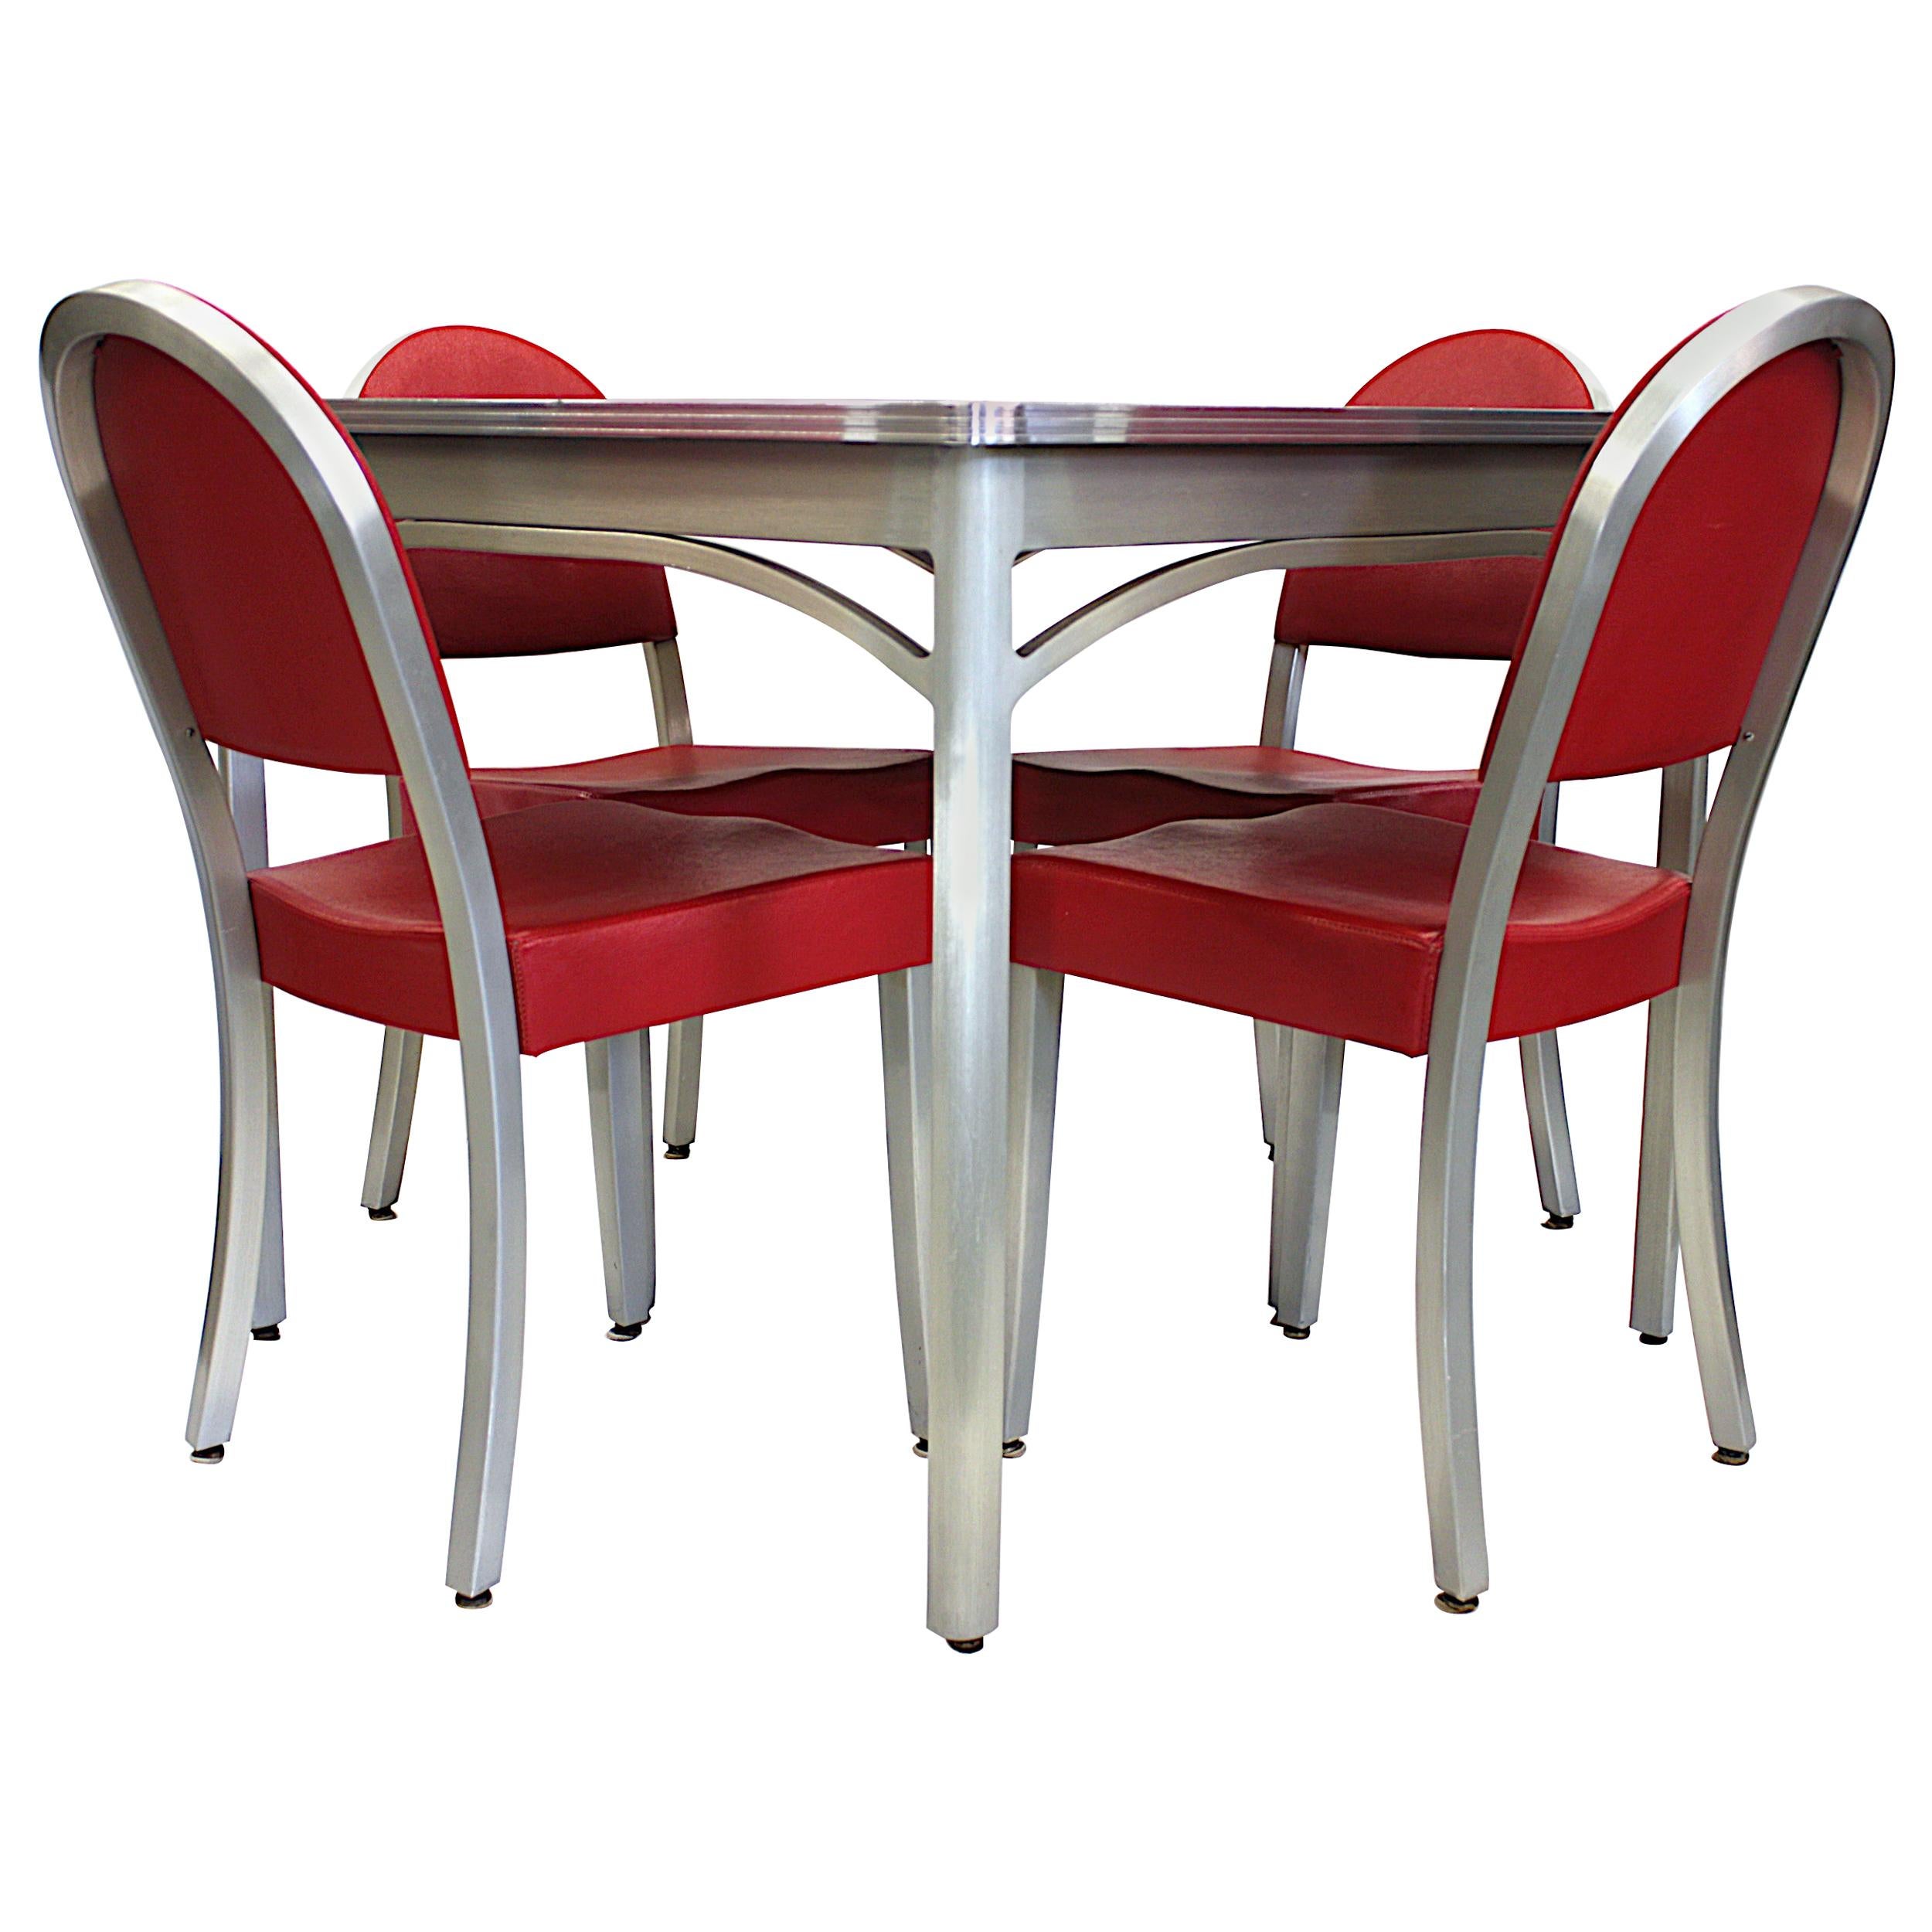 Vintage 1940s Mid-Century Modern Industrial Aluminum Table & Chairs by GoodForm